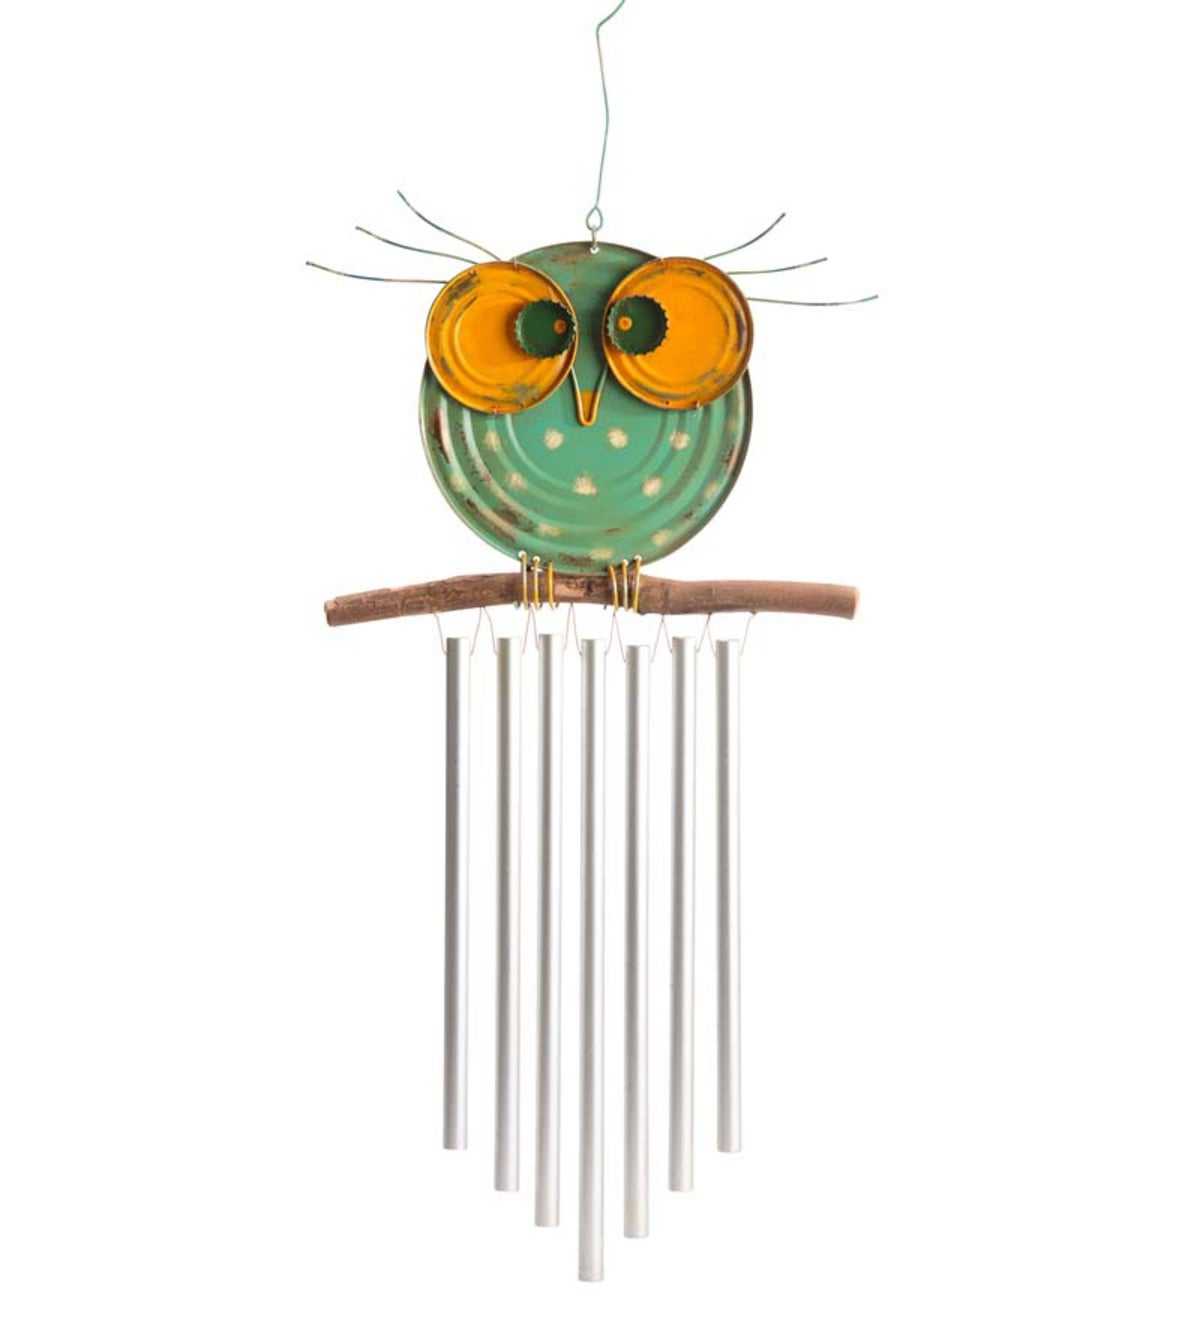 Simplychill Fair Trade Hand Made Recycled Metal Owl with Bells Windchime Wind Chime Mobile